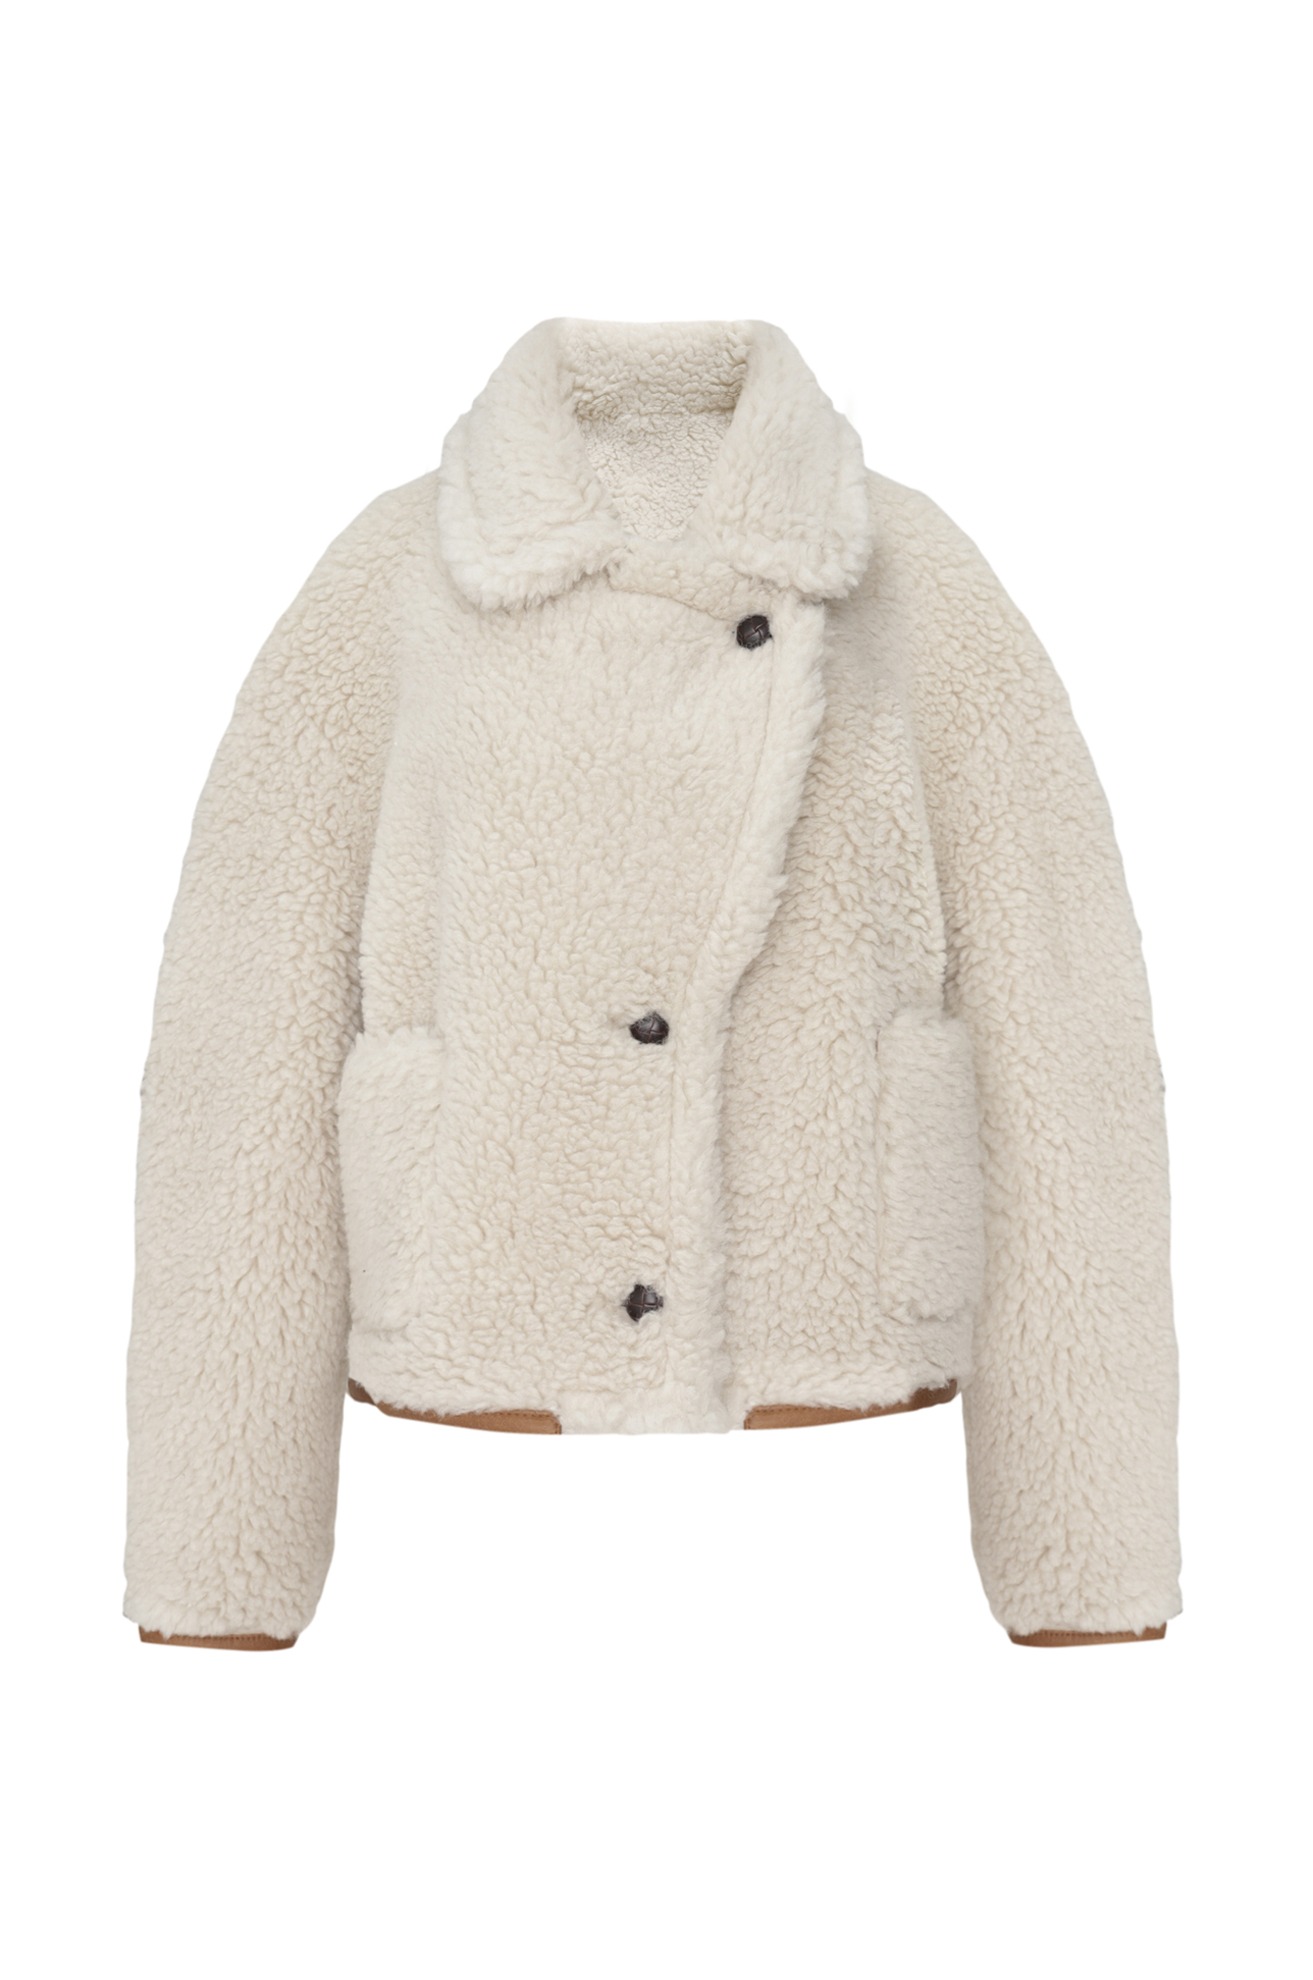 Reversible Eco Shearling Jacket (Fabric by Tessile Fiorentina)